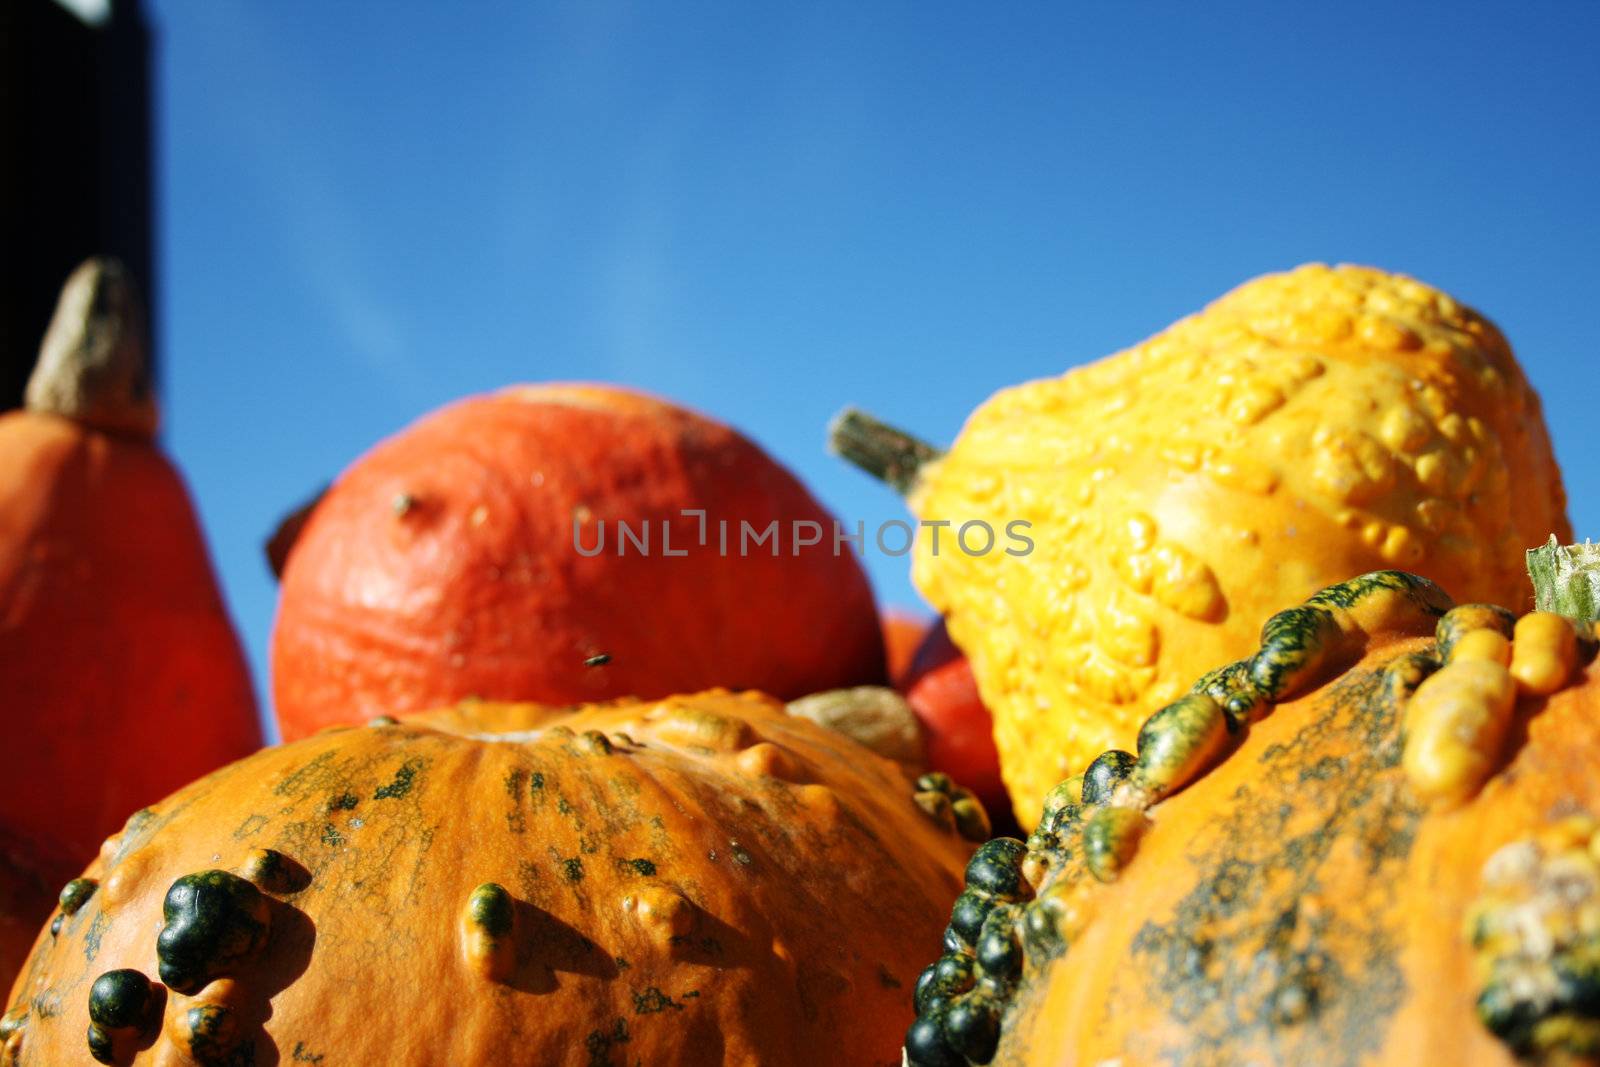 Large healthy pumpkins by photochecker